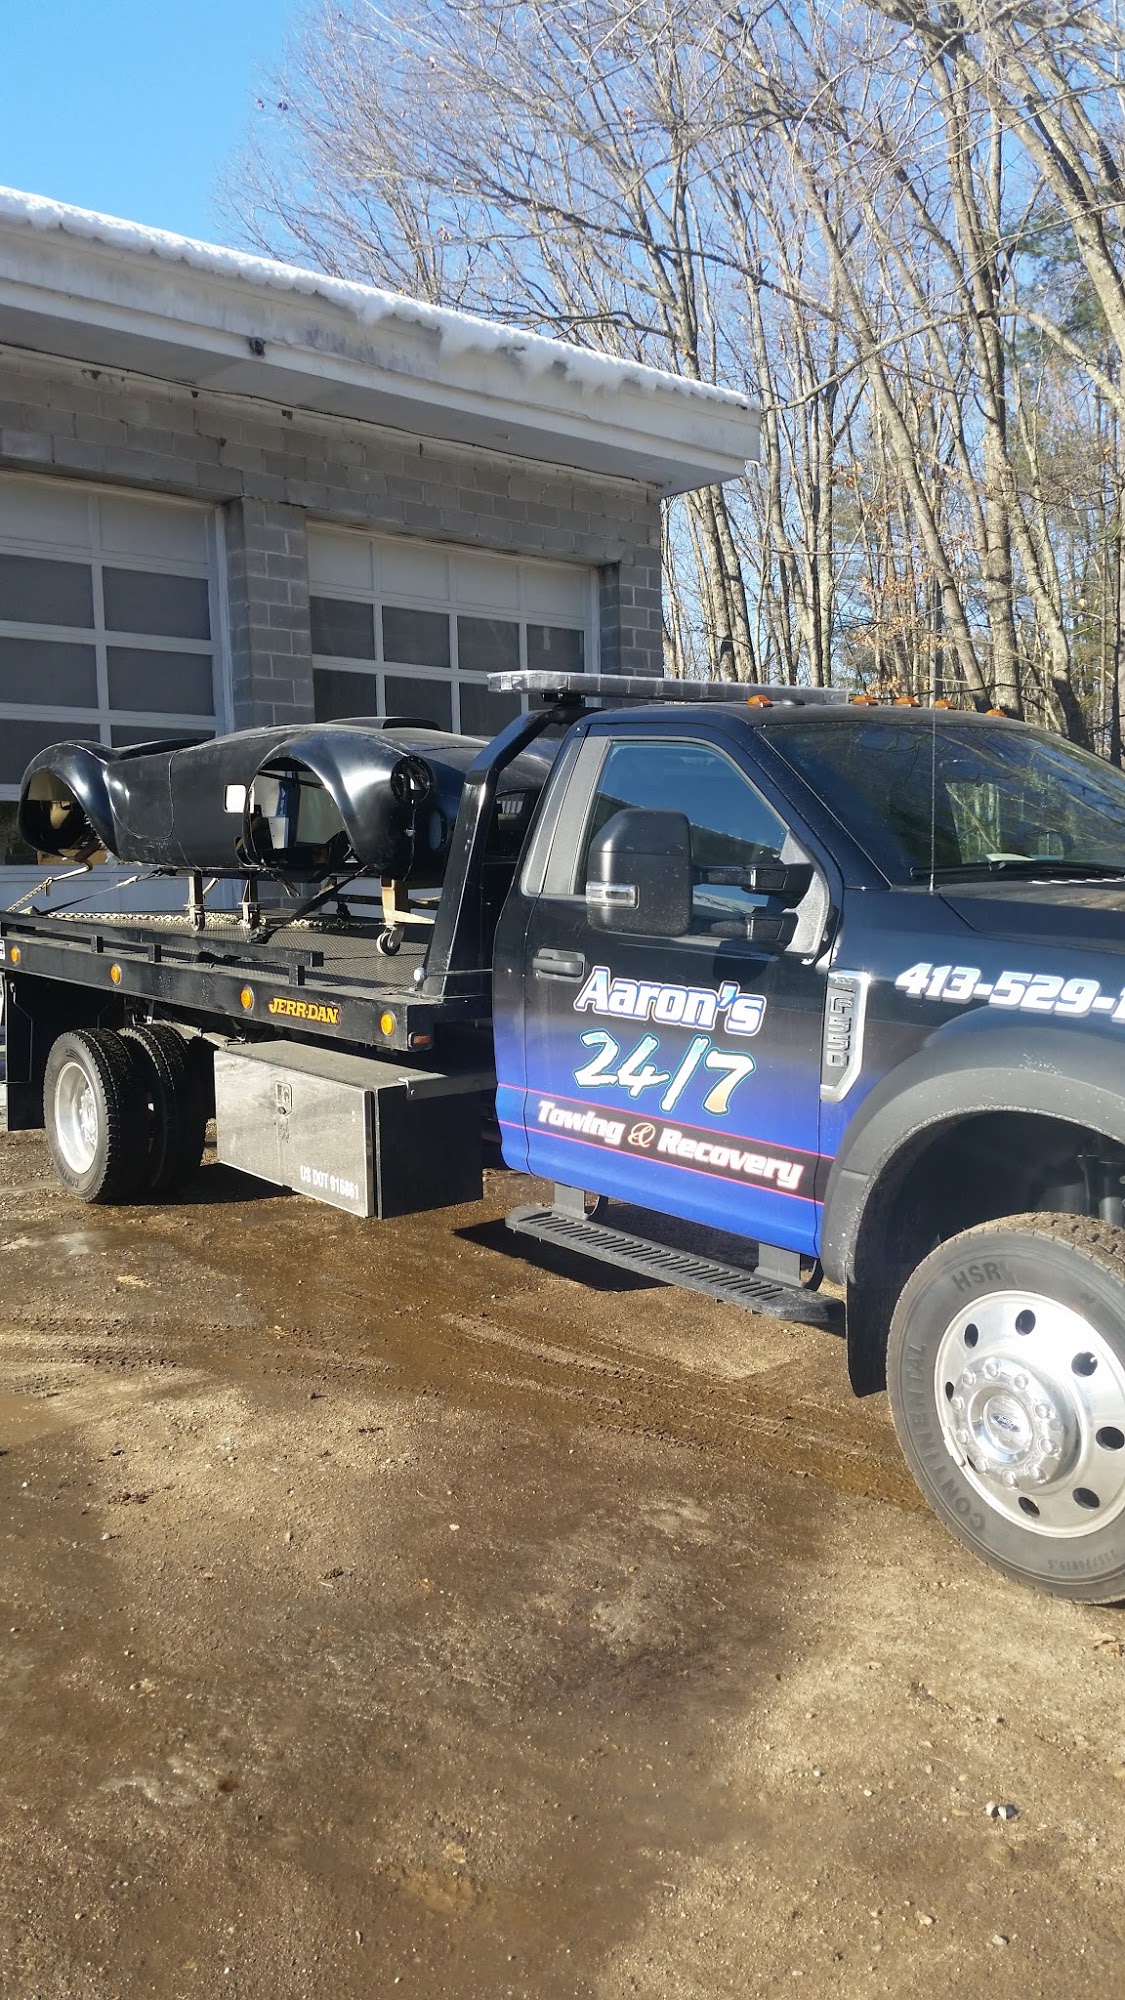 Aarons 24/7 Towing and Recovery